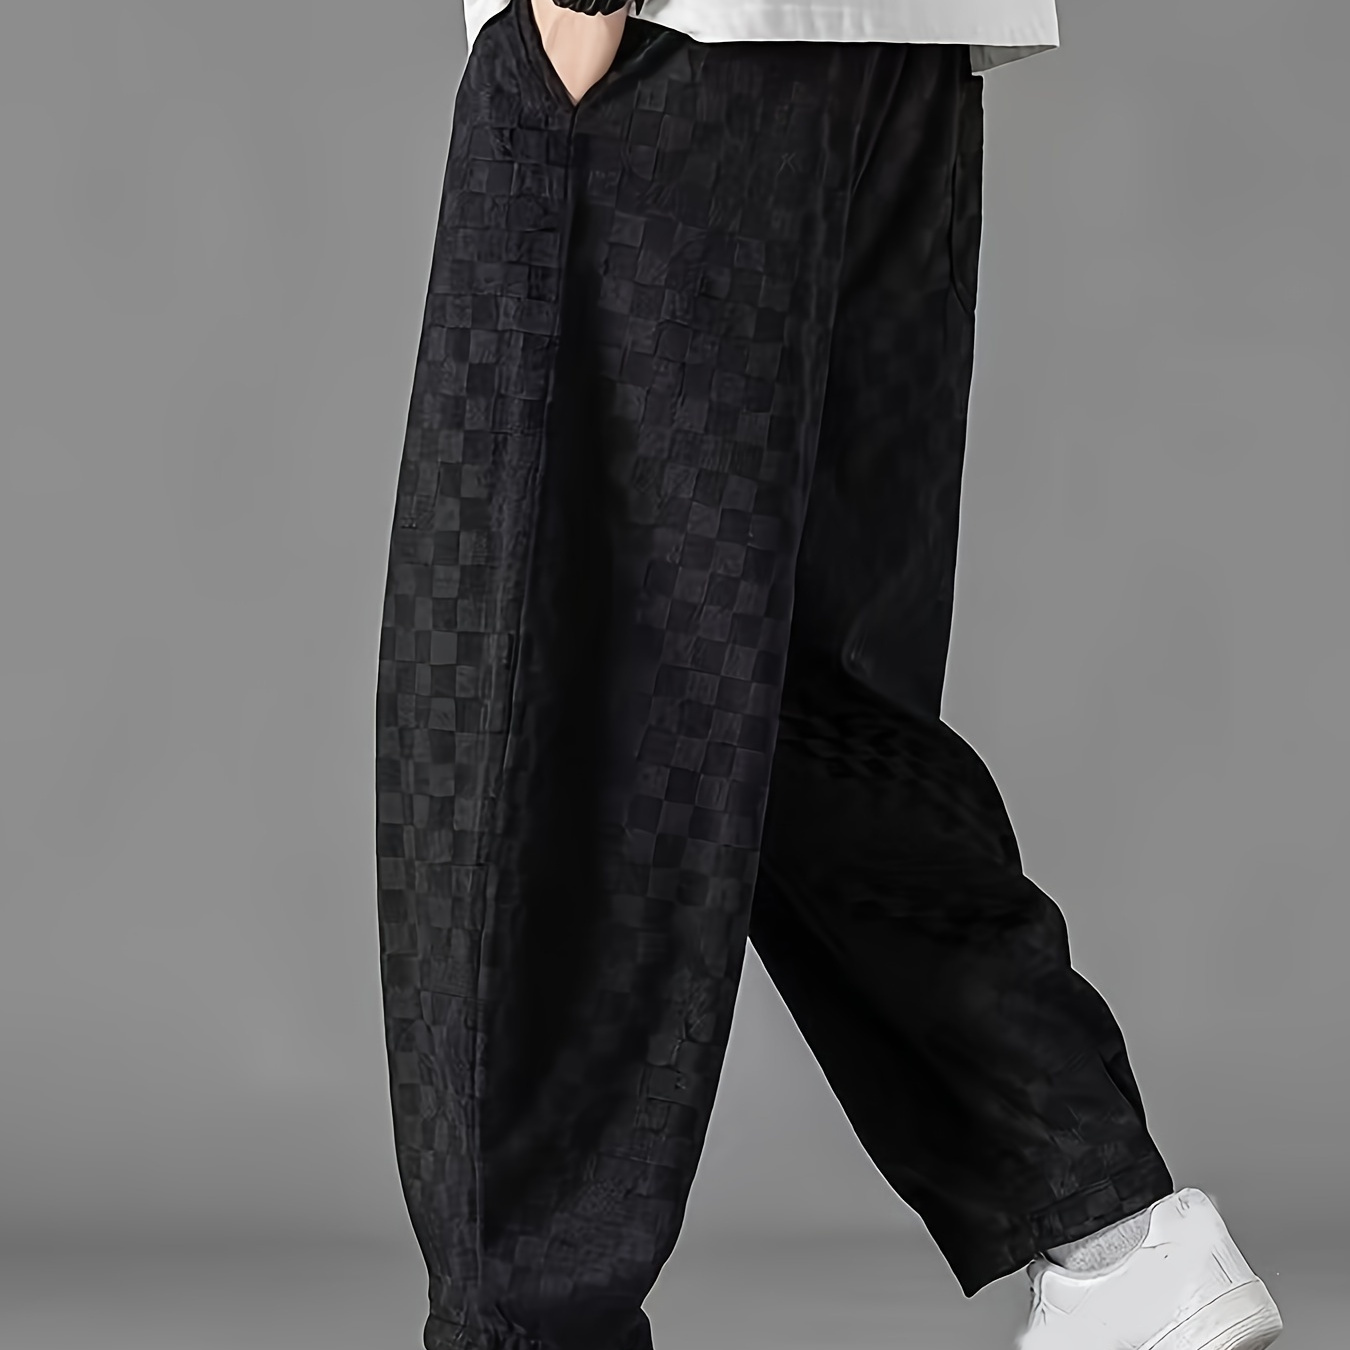 

Men's Loose Corduroy Checkered Print Sports Pants With Pockets, Casual Drawstring Trousers For Outdoor Activities Gift